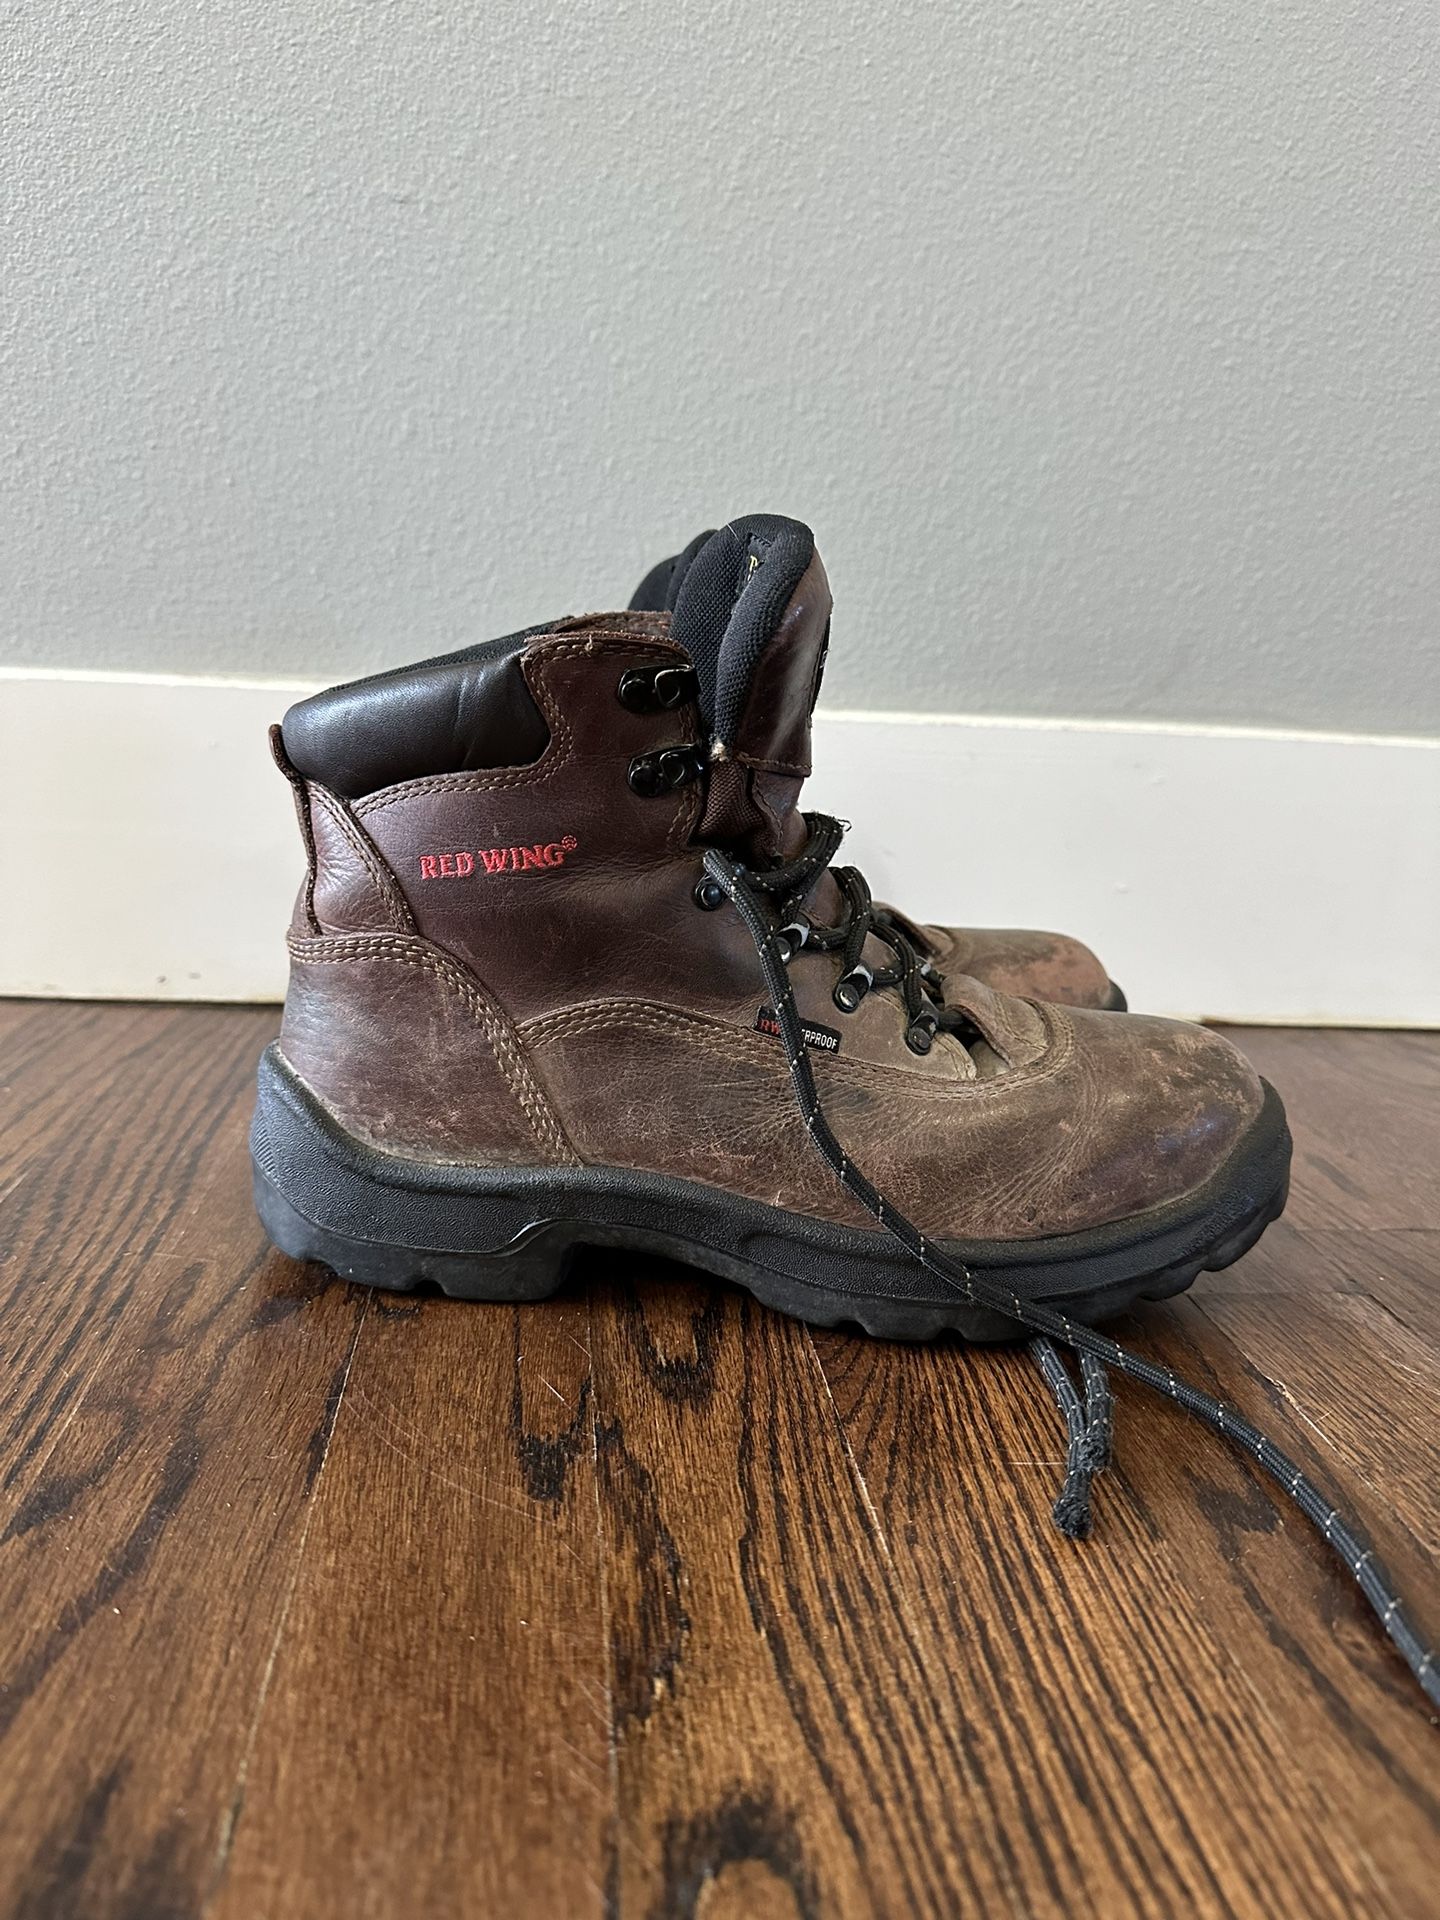 Red Wing Men’s King Toe 6” Composite/Safety Toe Waterproof Work Boots, Thinsulate, Size 8